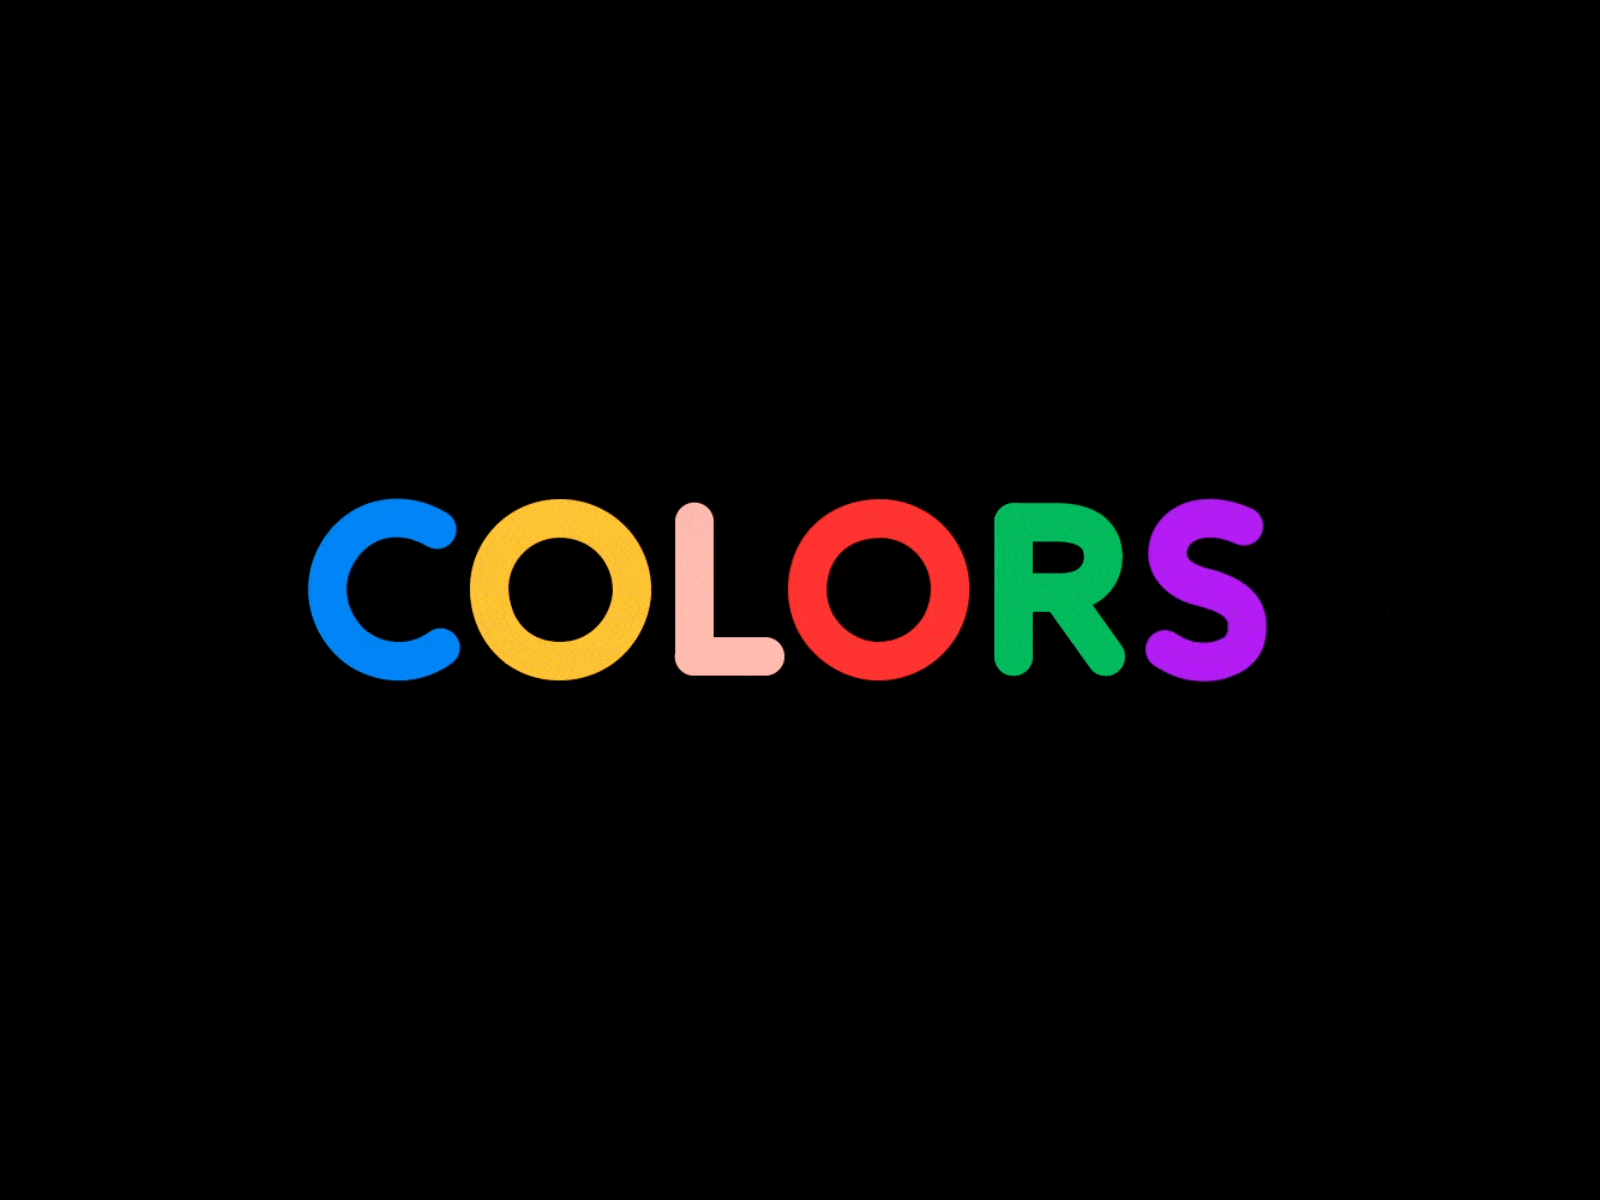 colors-by-sofie-nilsson-on-dribbble